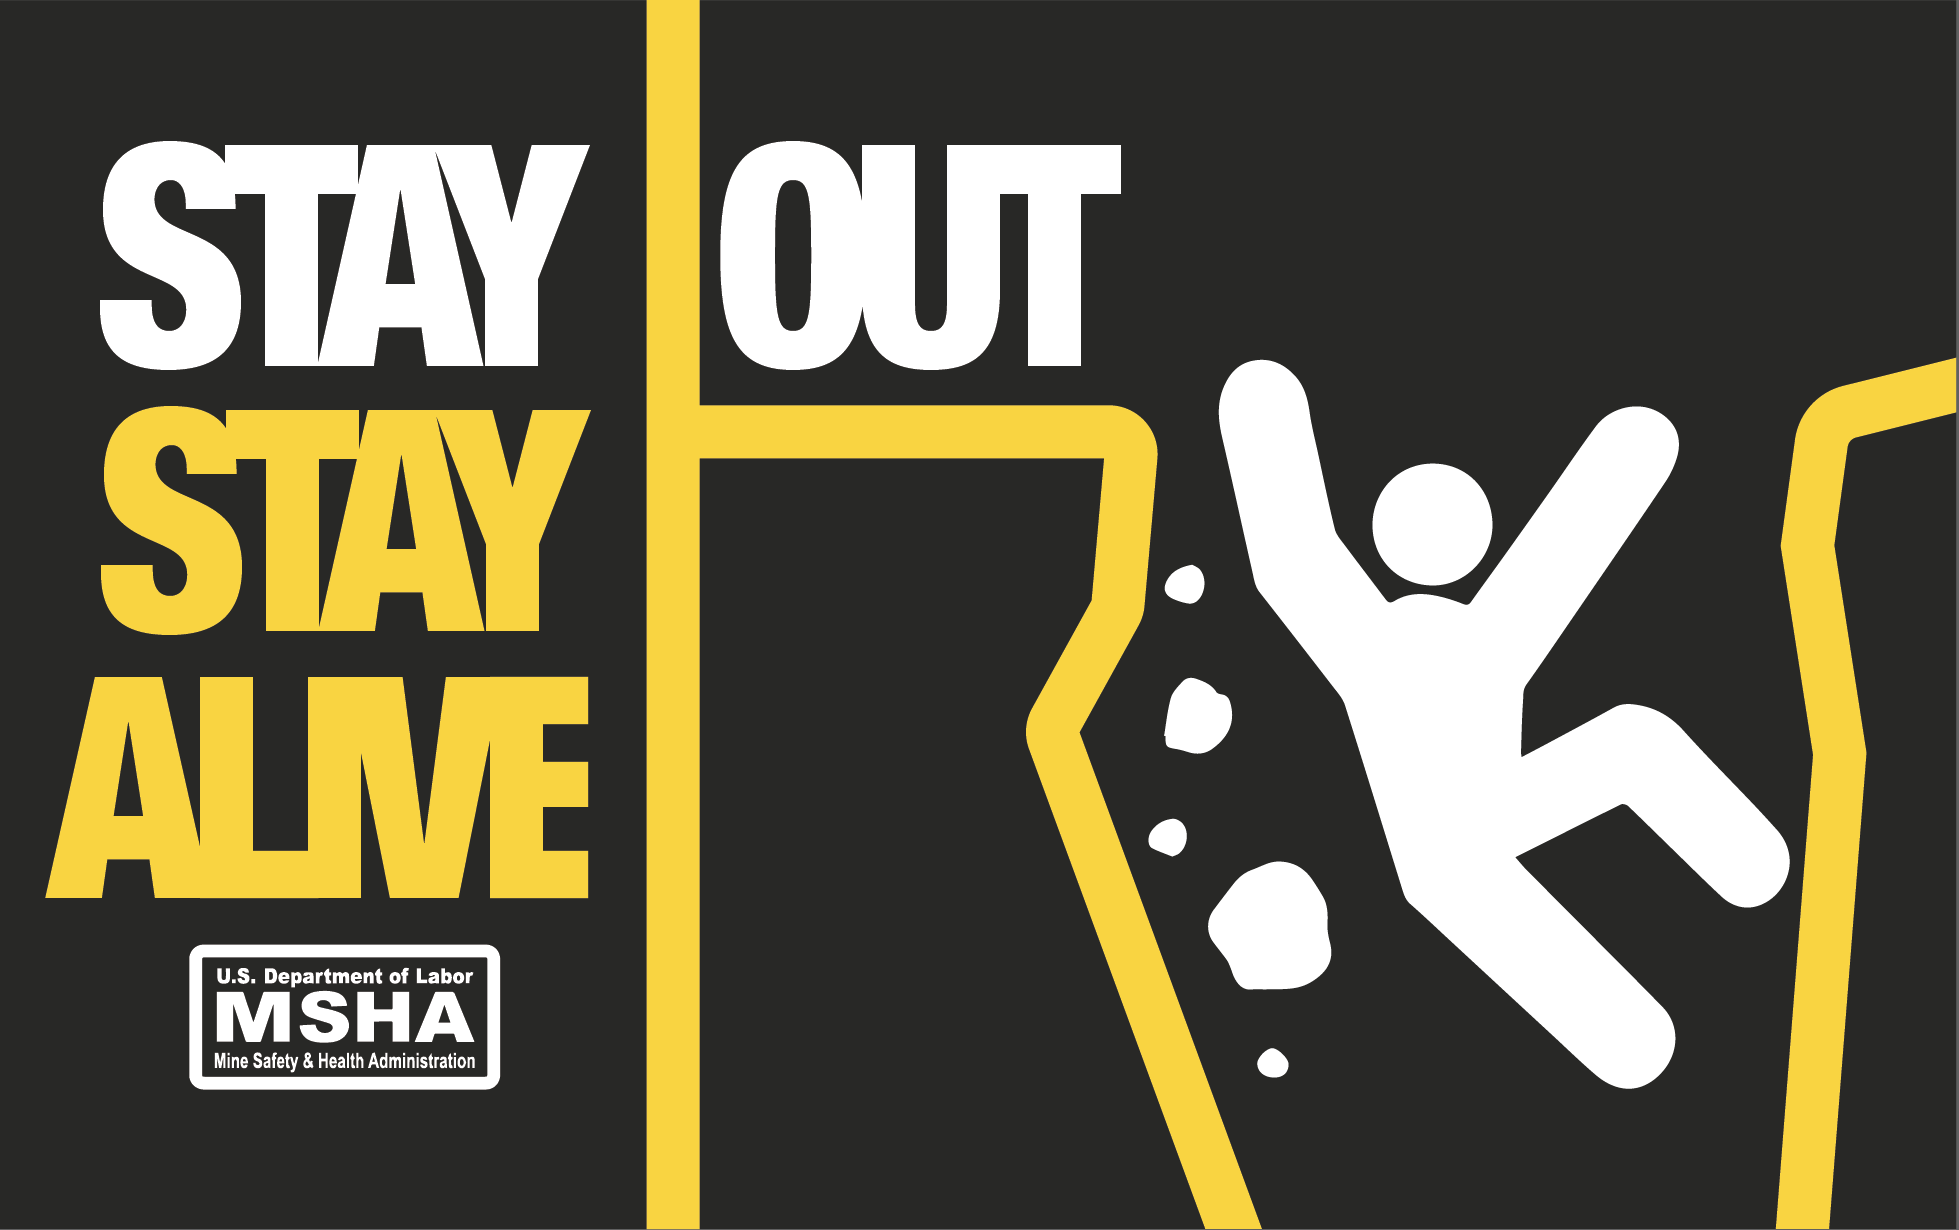 MSHA Stay Out Stay Alive Logo for 2021